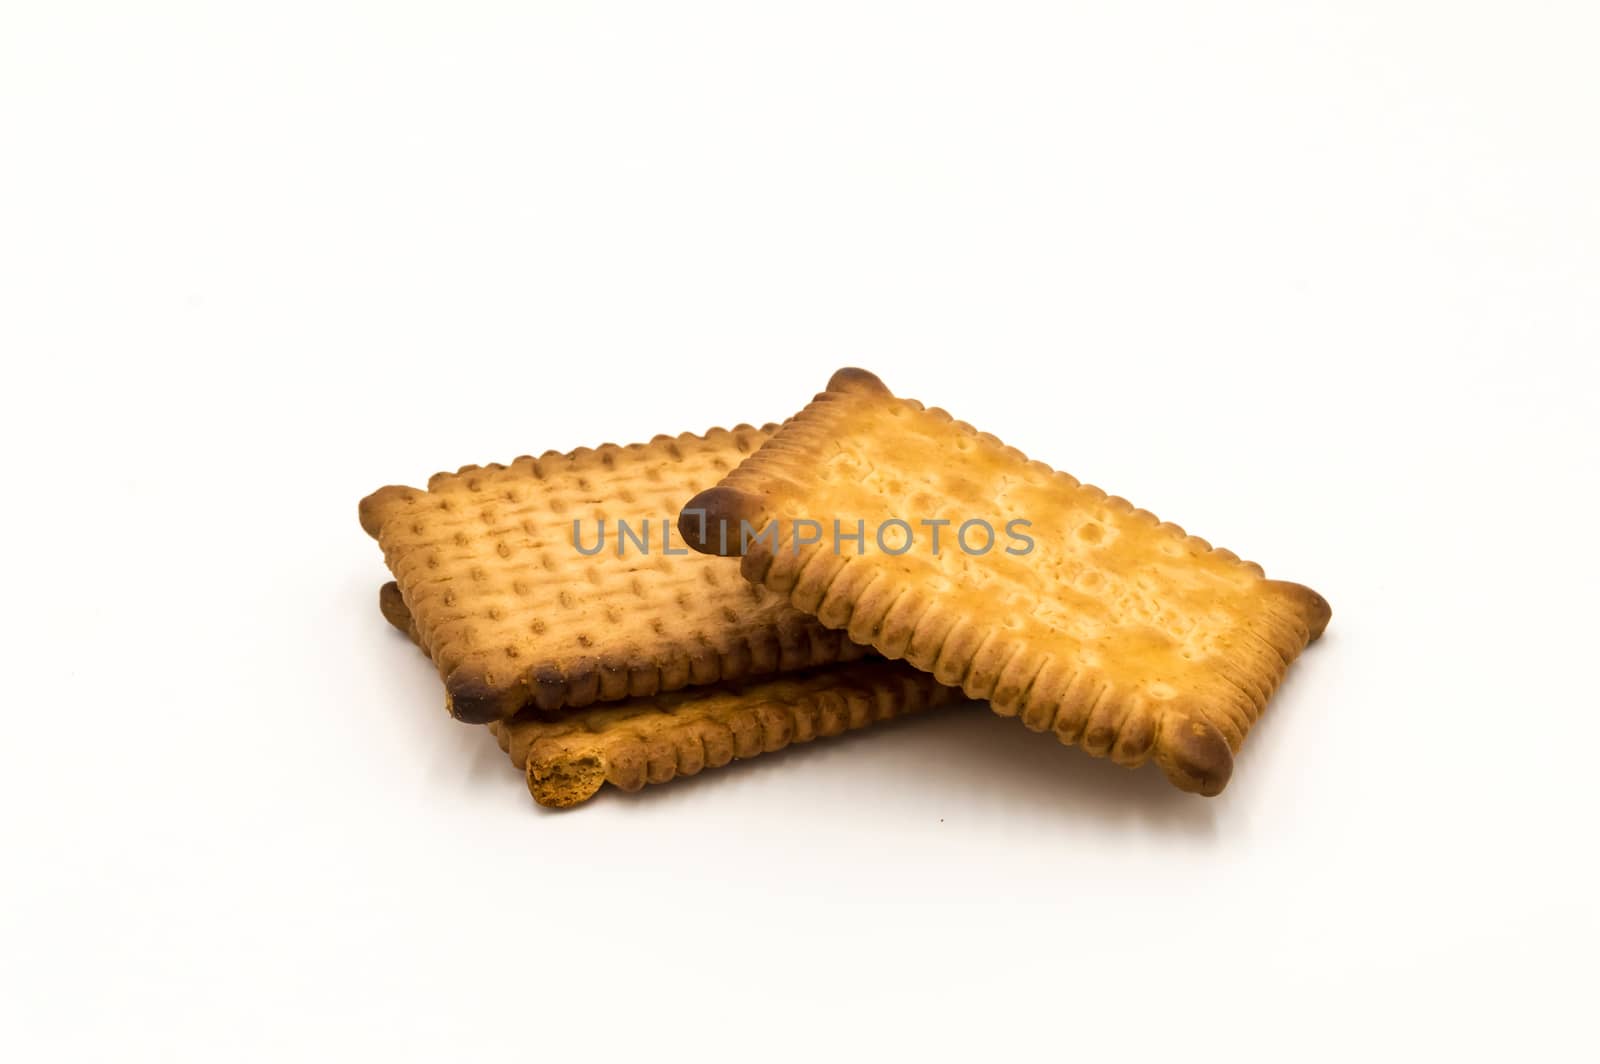 Small butter cookies close up front view on a white background